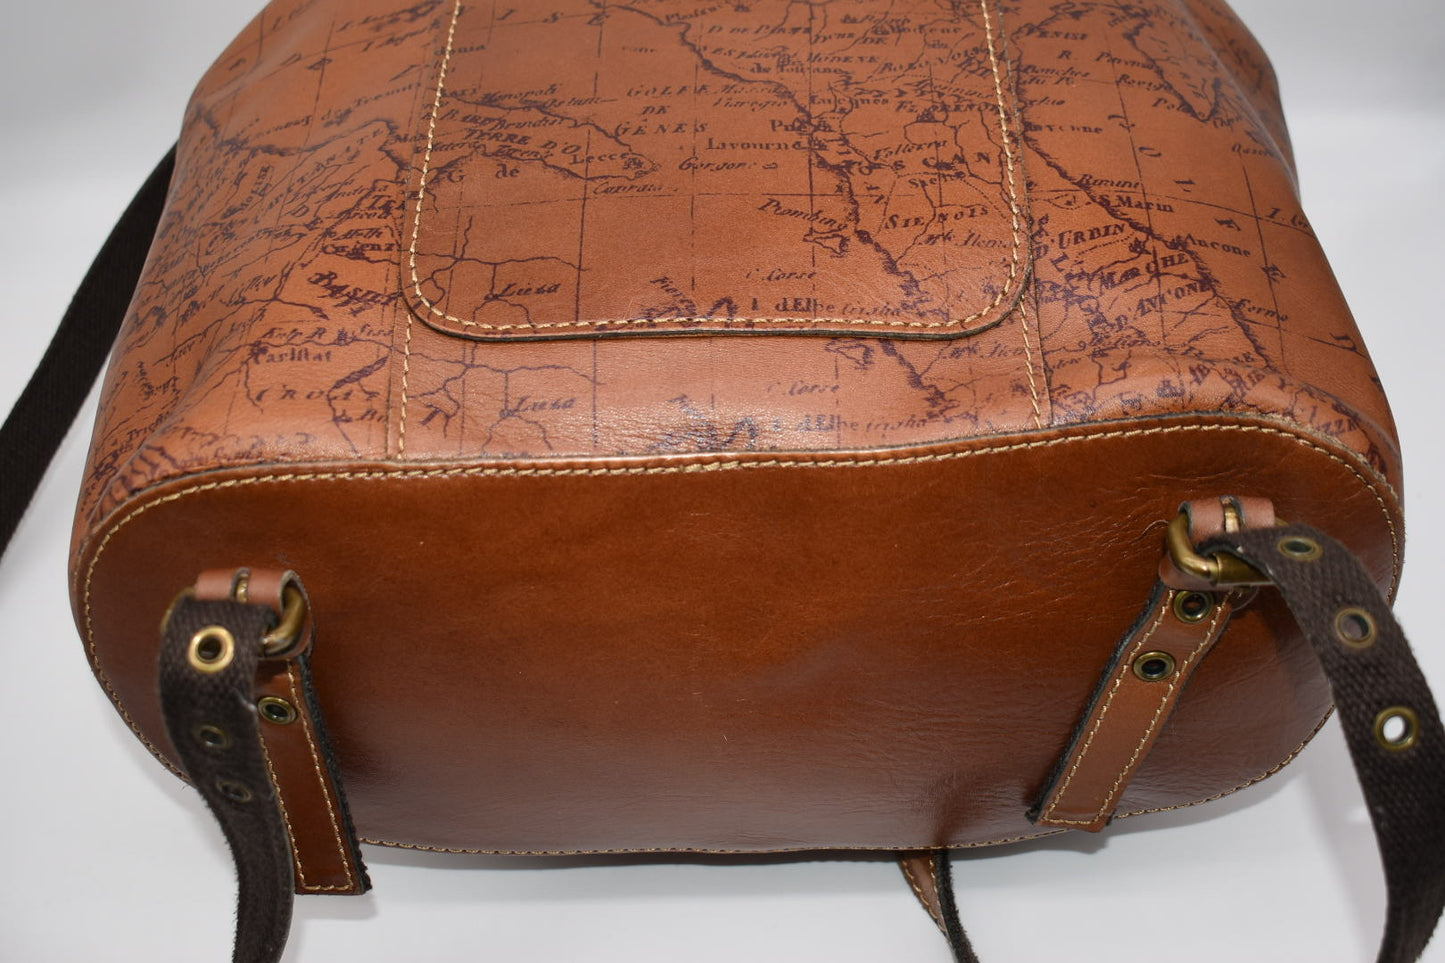 Patricia Nash Casape Backpack in Signature Map